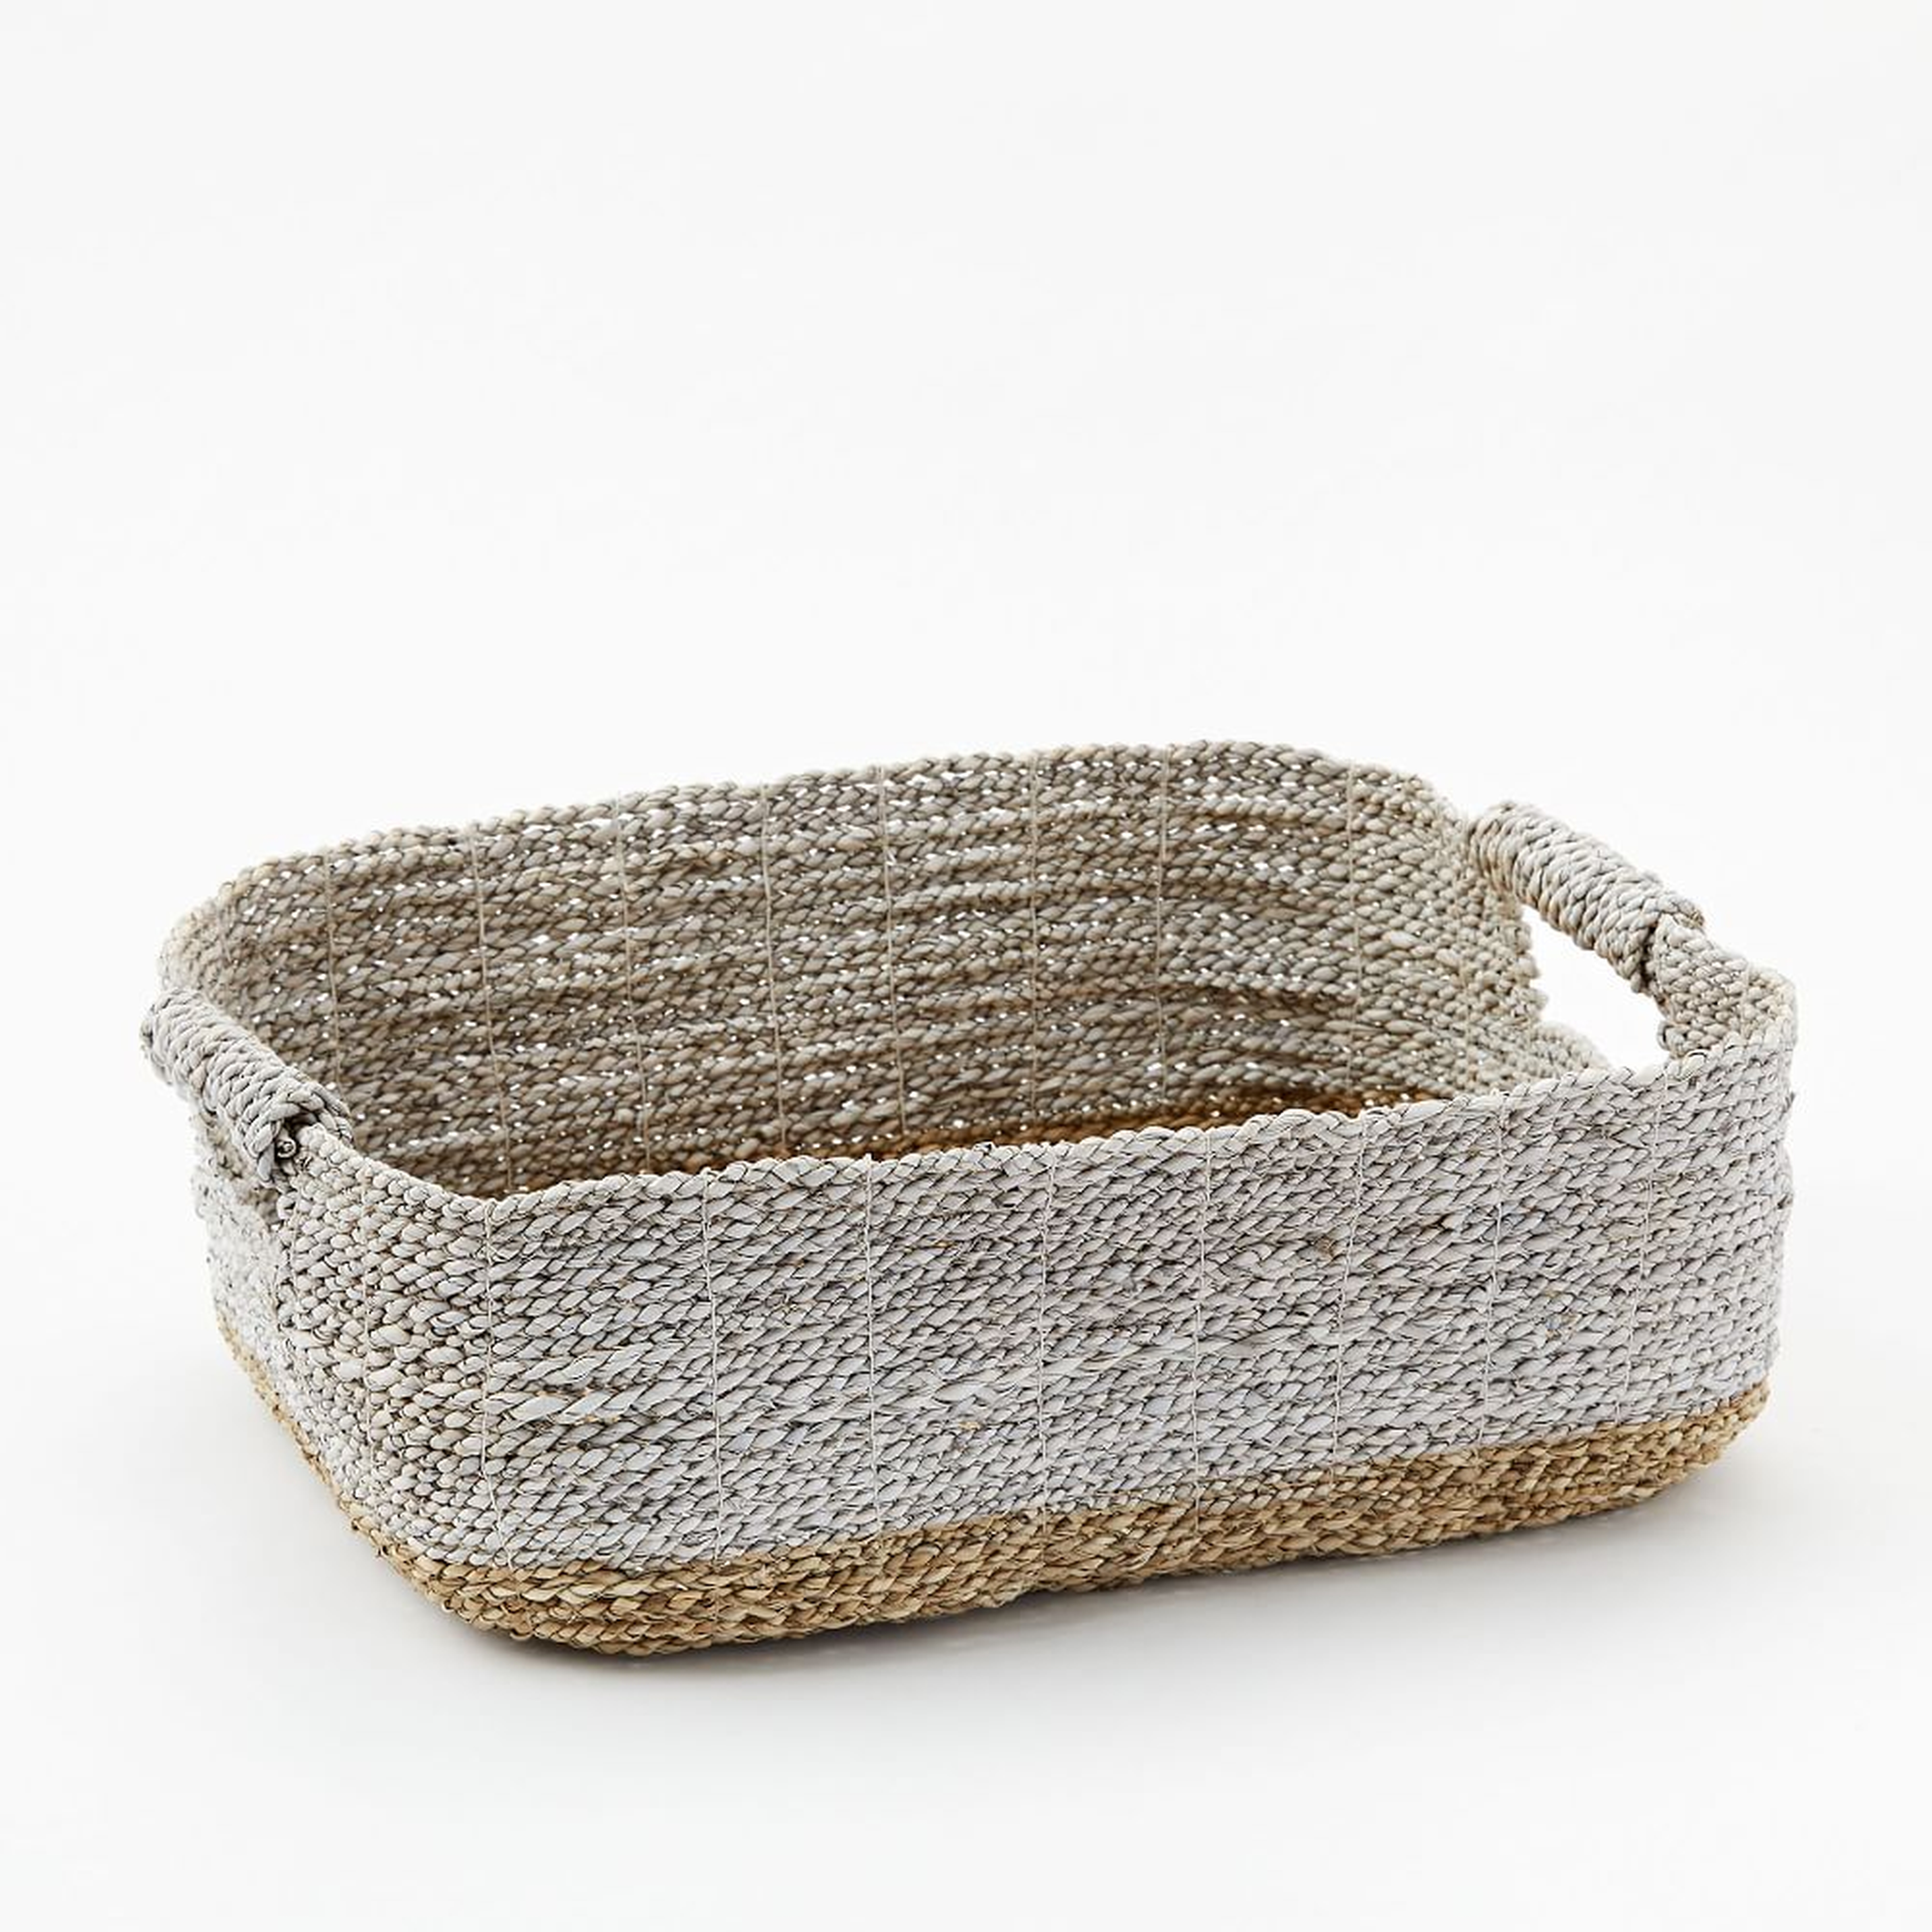 Two-Tone Woven Baskets, Natural/White, Underbed Basket - West Elm